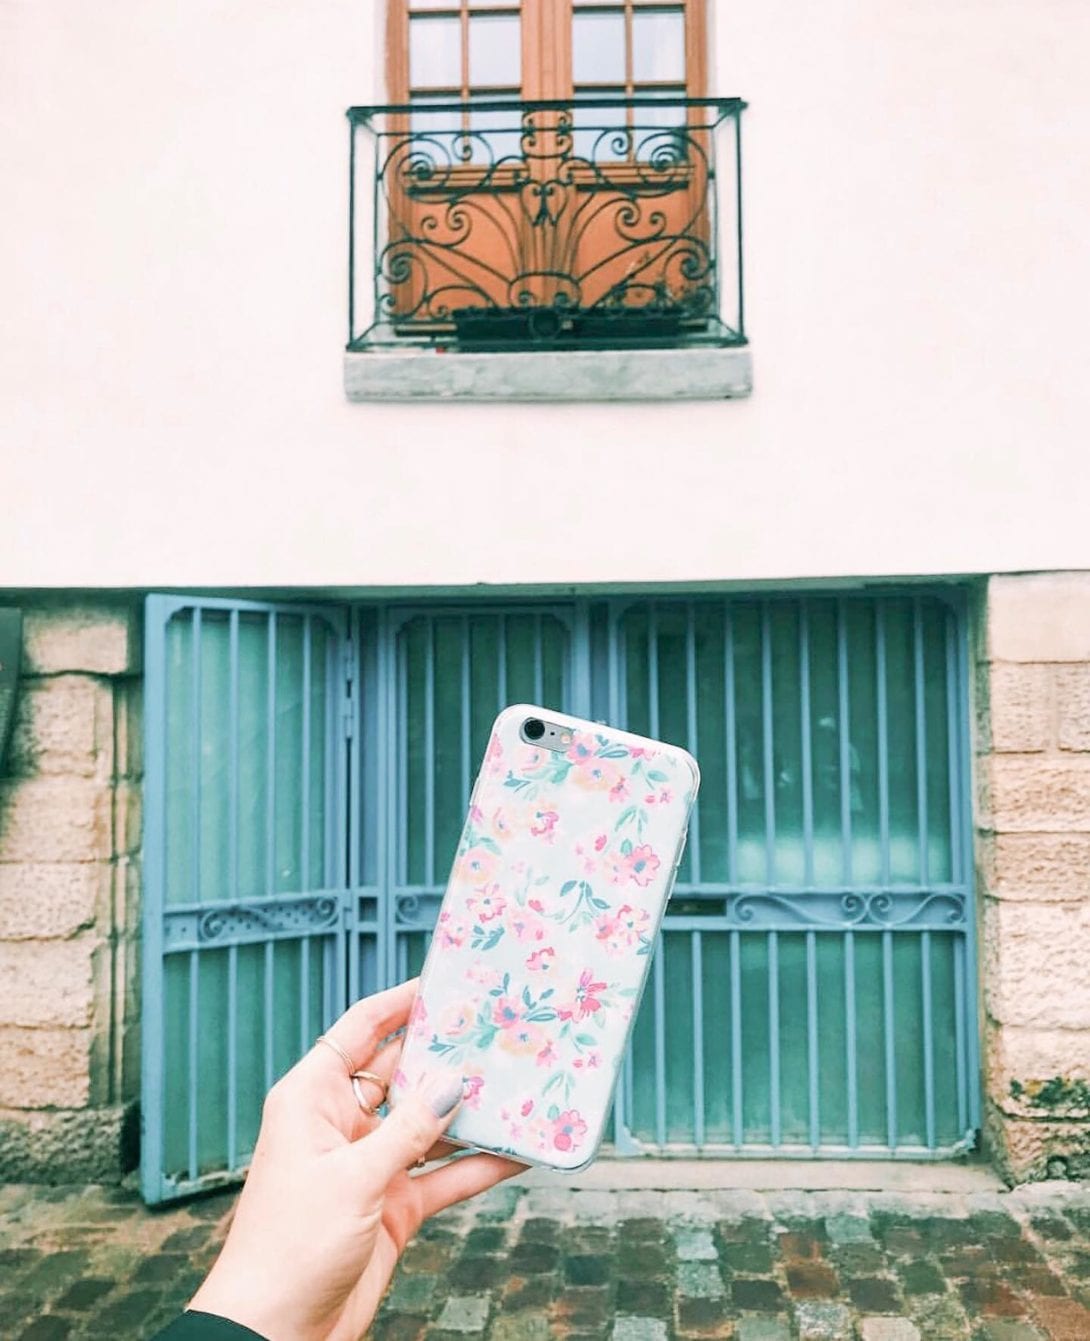 missing the beautiful streets of paris find our floral pattern case on WWW.CASESBYKATE.COM ️
•
•
•
•
•
•